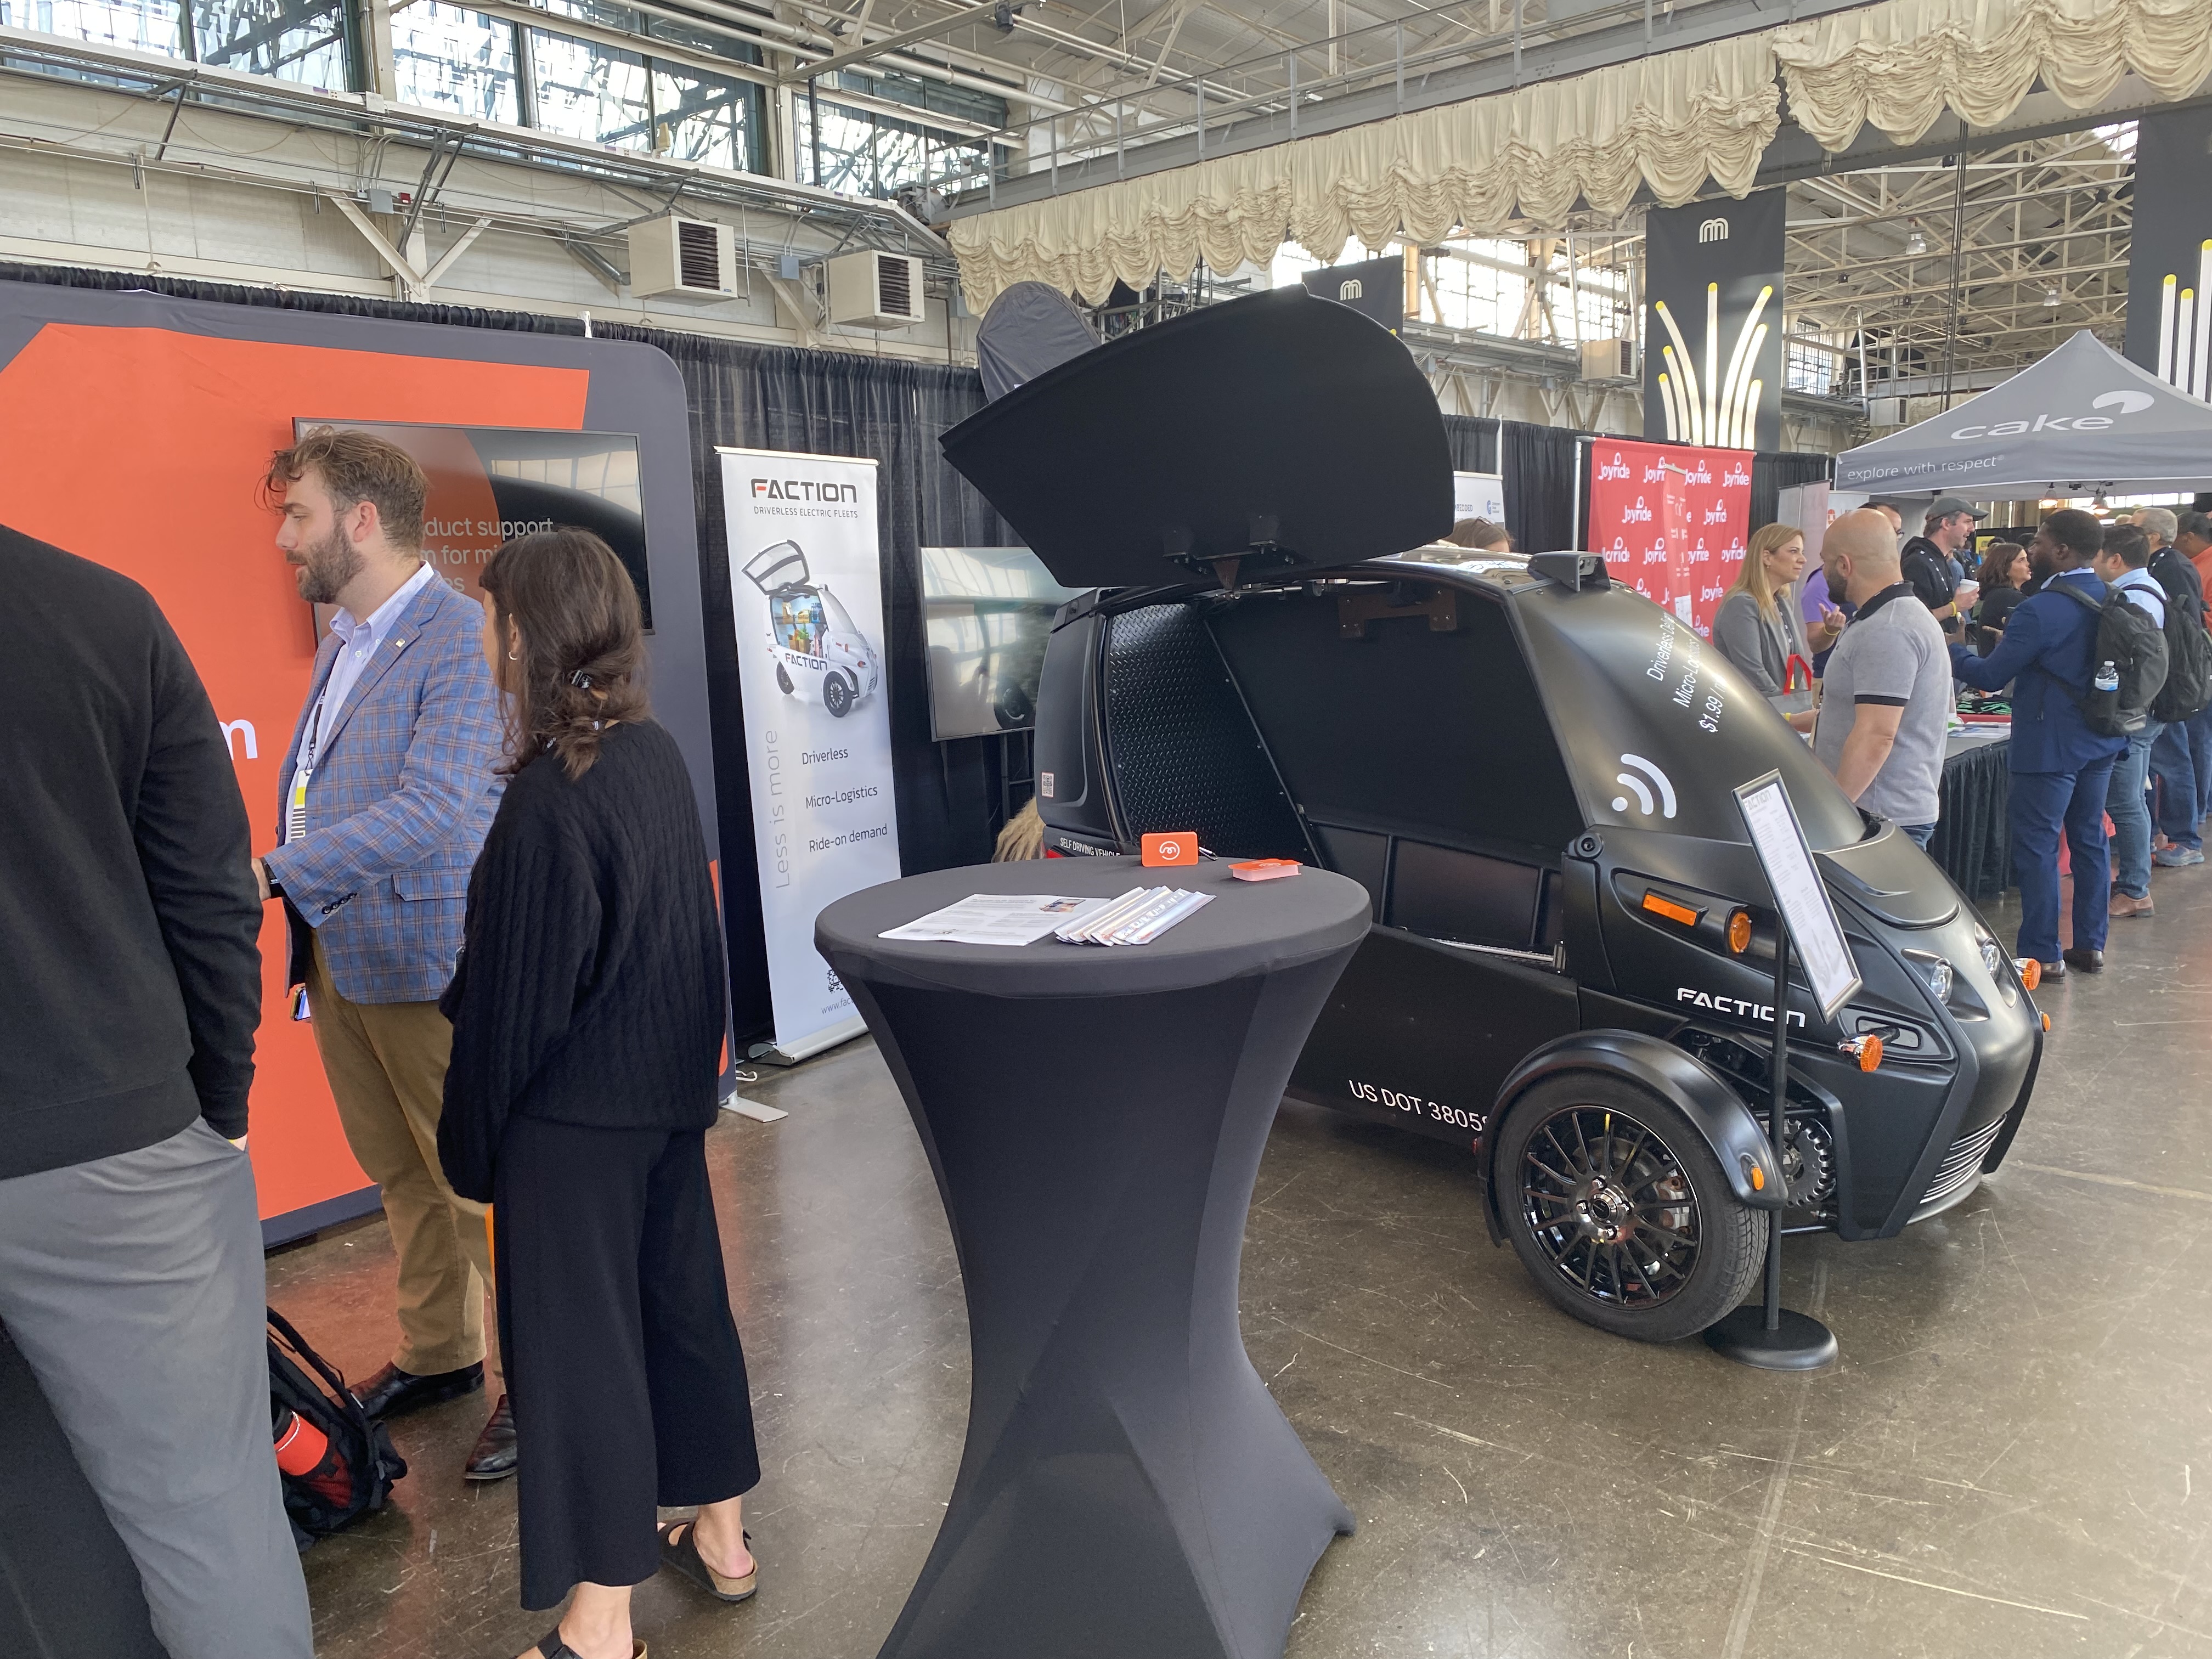 Trade show floor showing small, electric car from manufacturer Faction